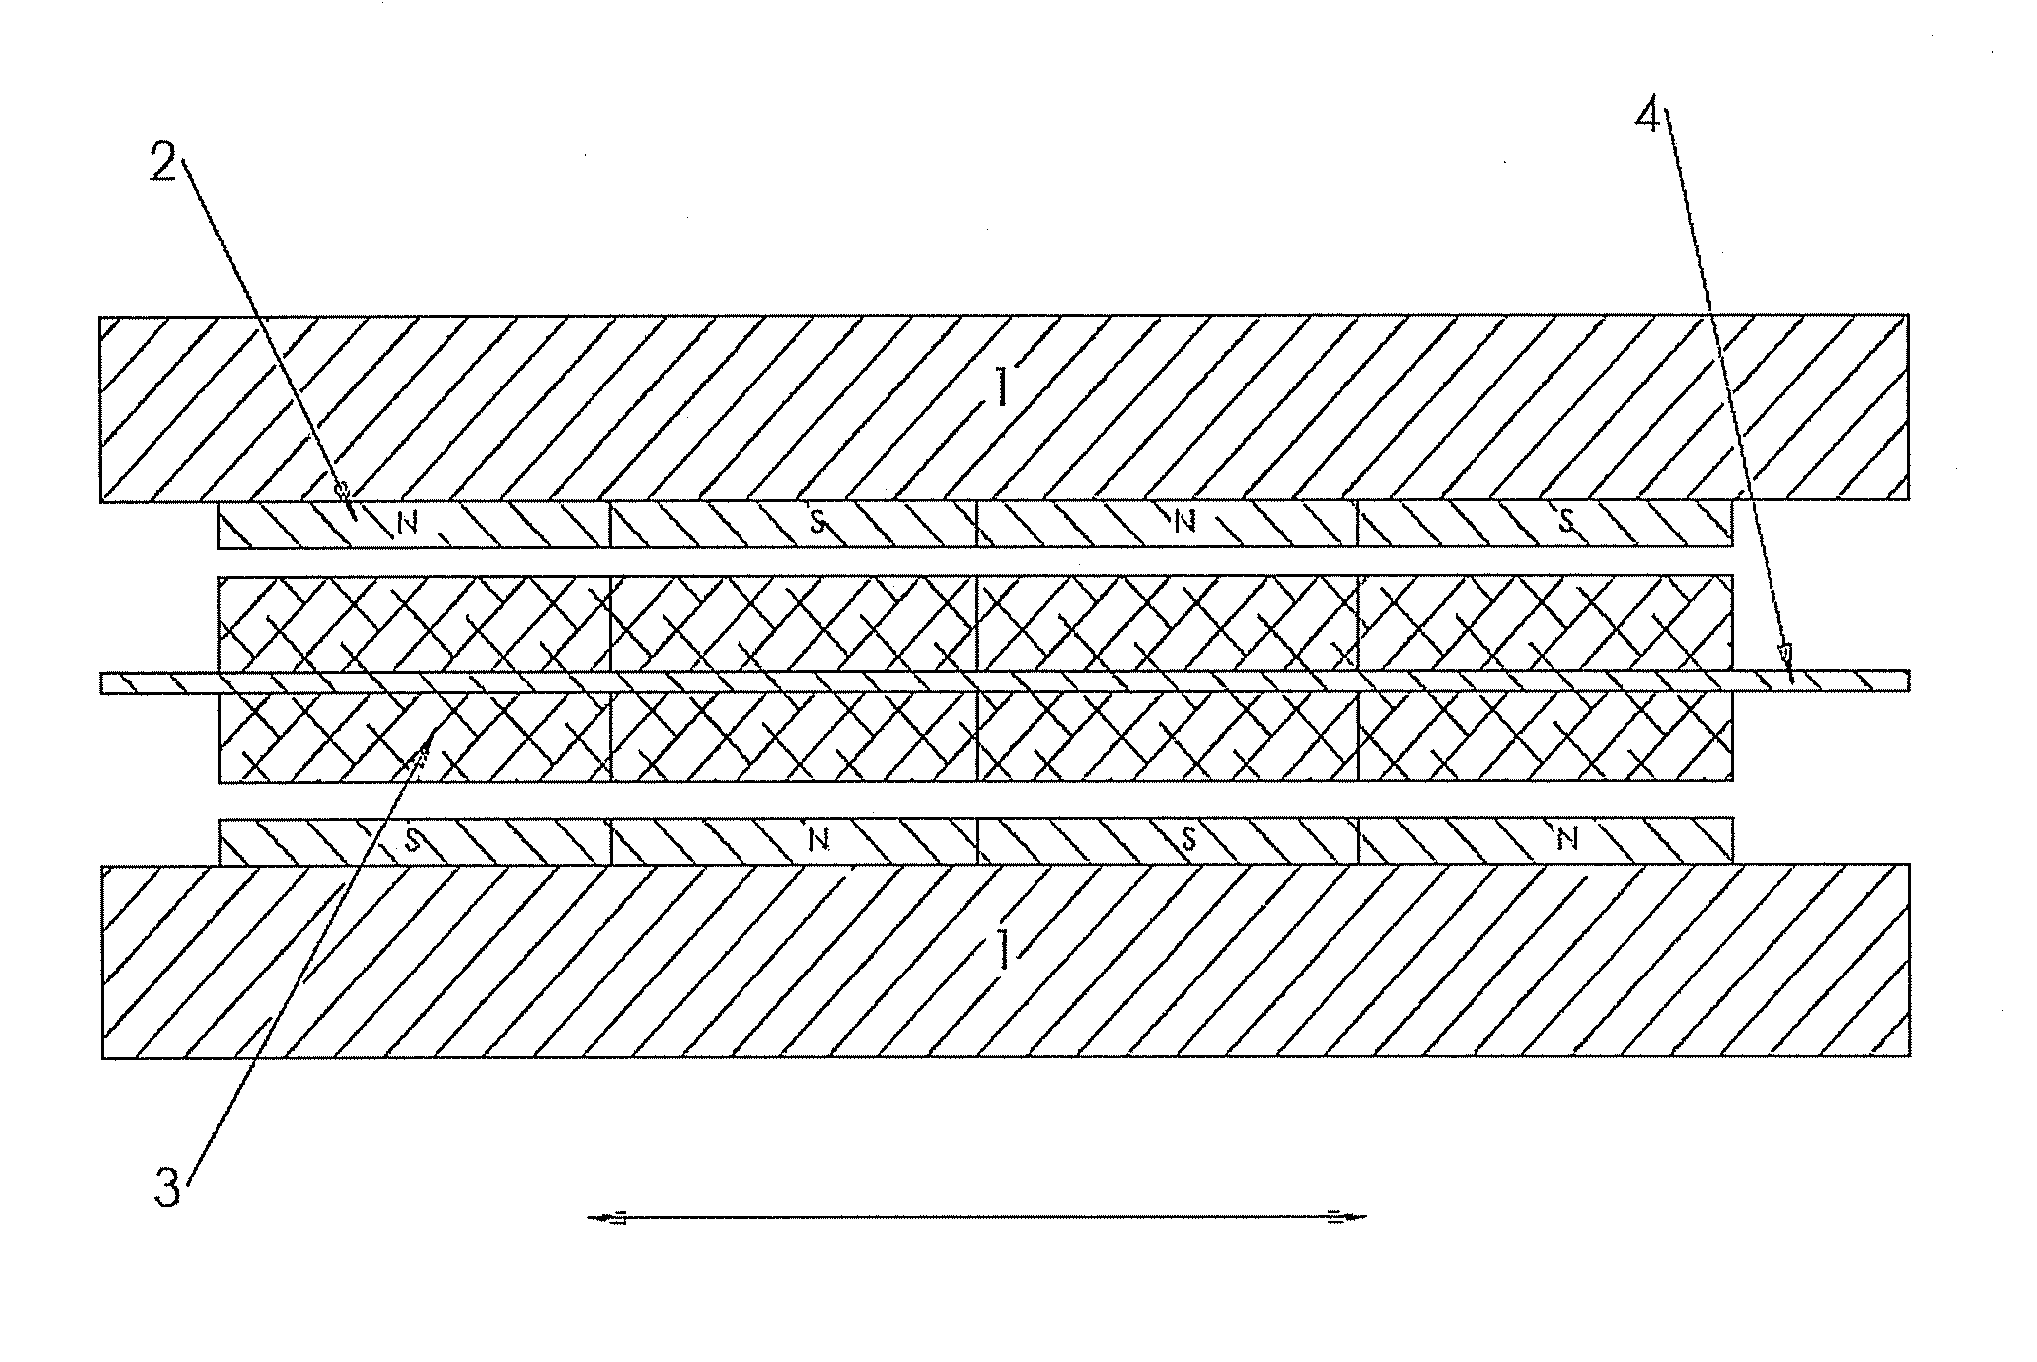 Electromagnetic load device for an apparatus for physical exercise, and apparatus provided with said device